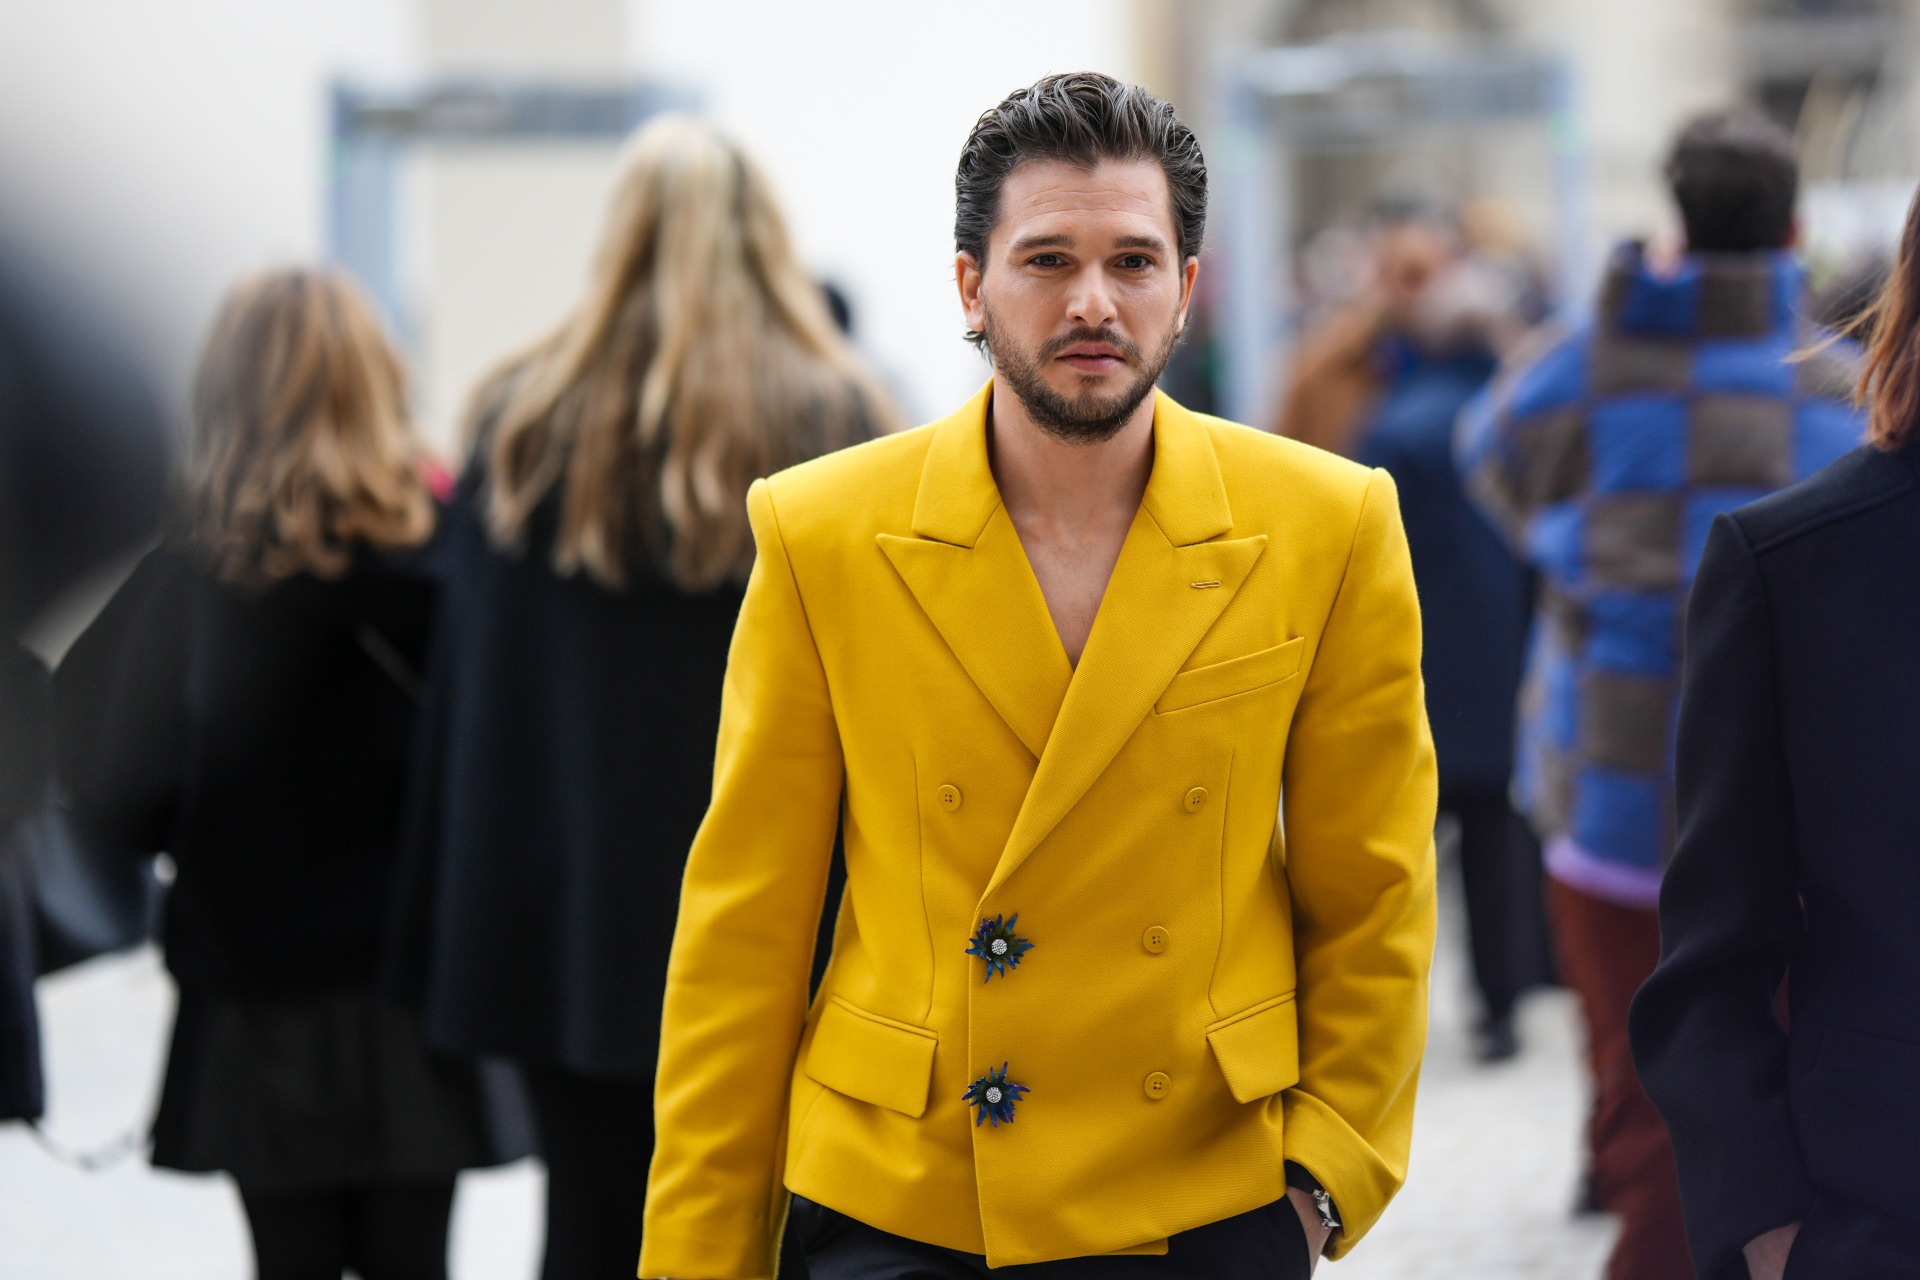 Kit Harington and Rose Leslie make stylish appearance for Louis Vuitton  Menswear show - ABC News